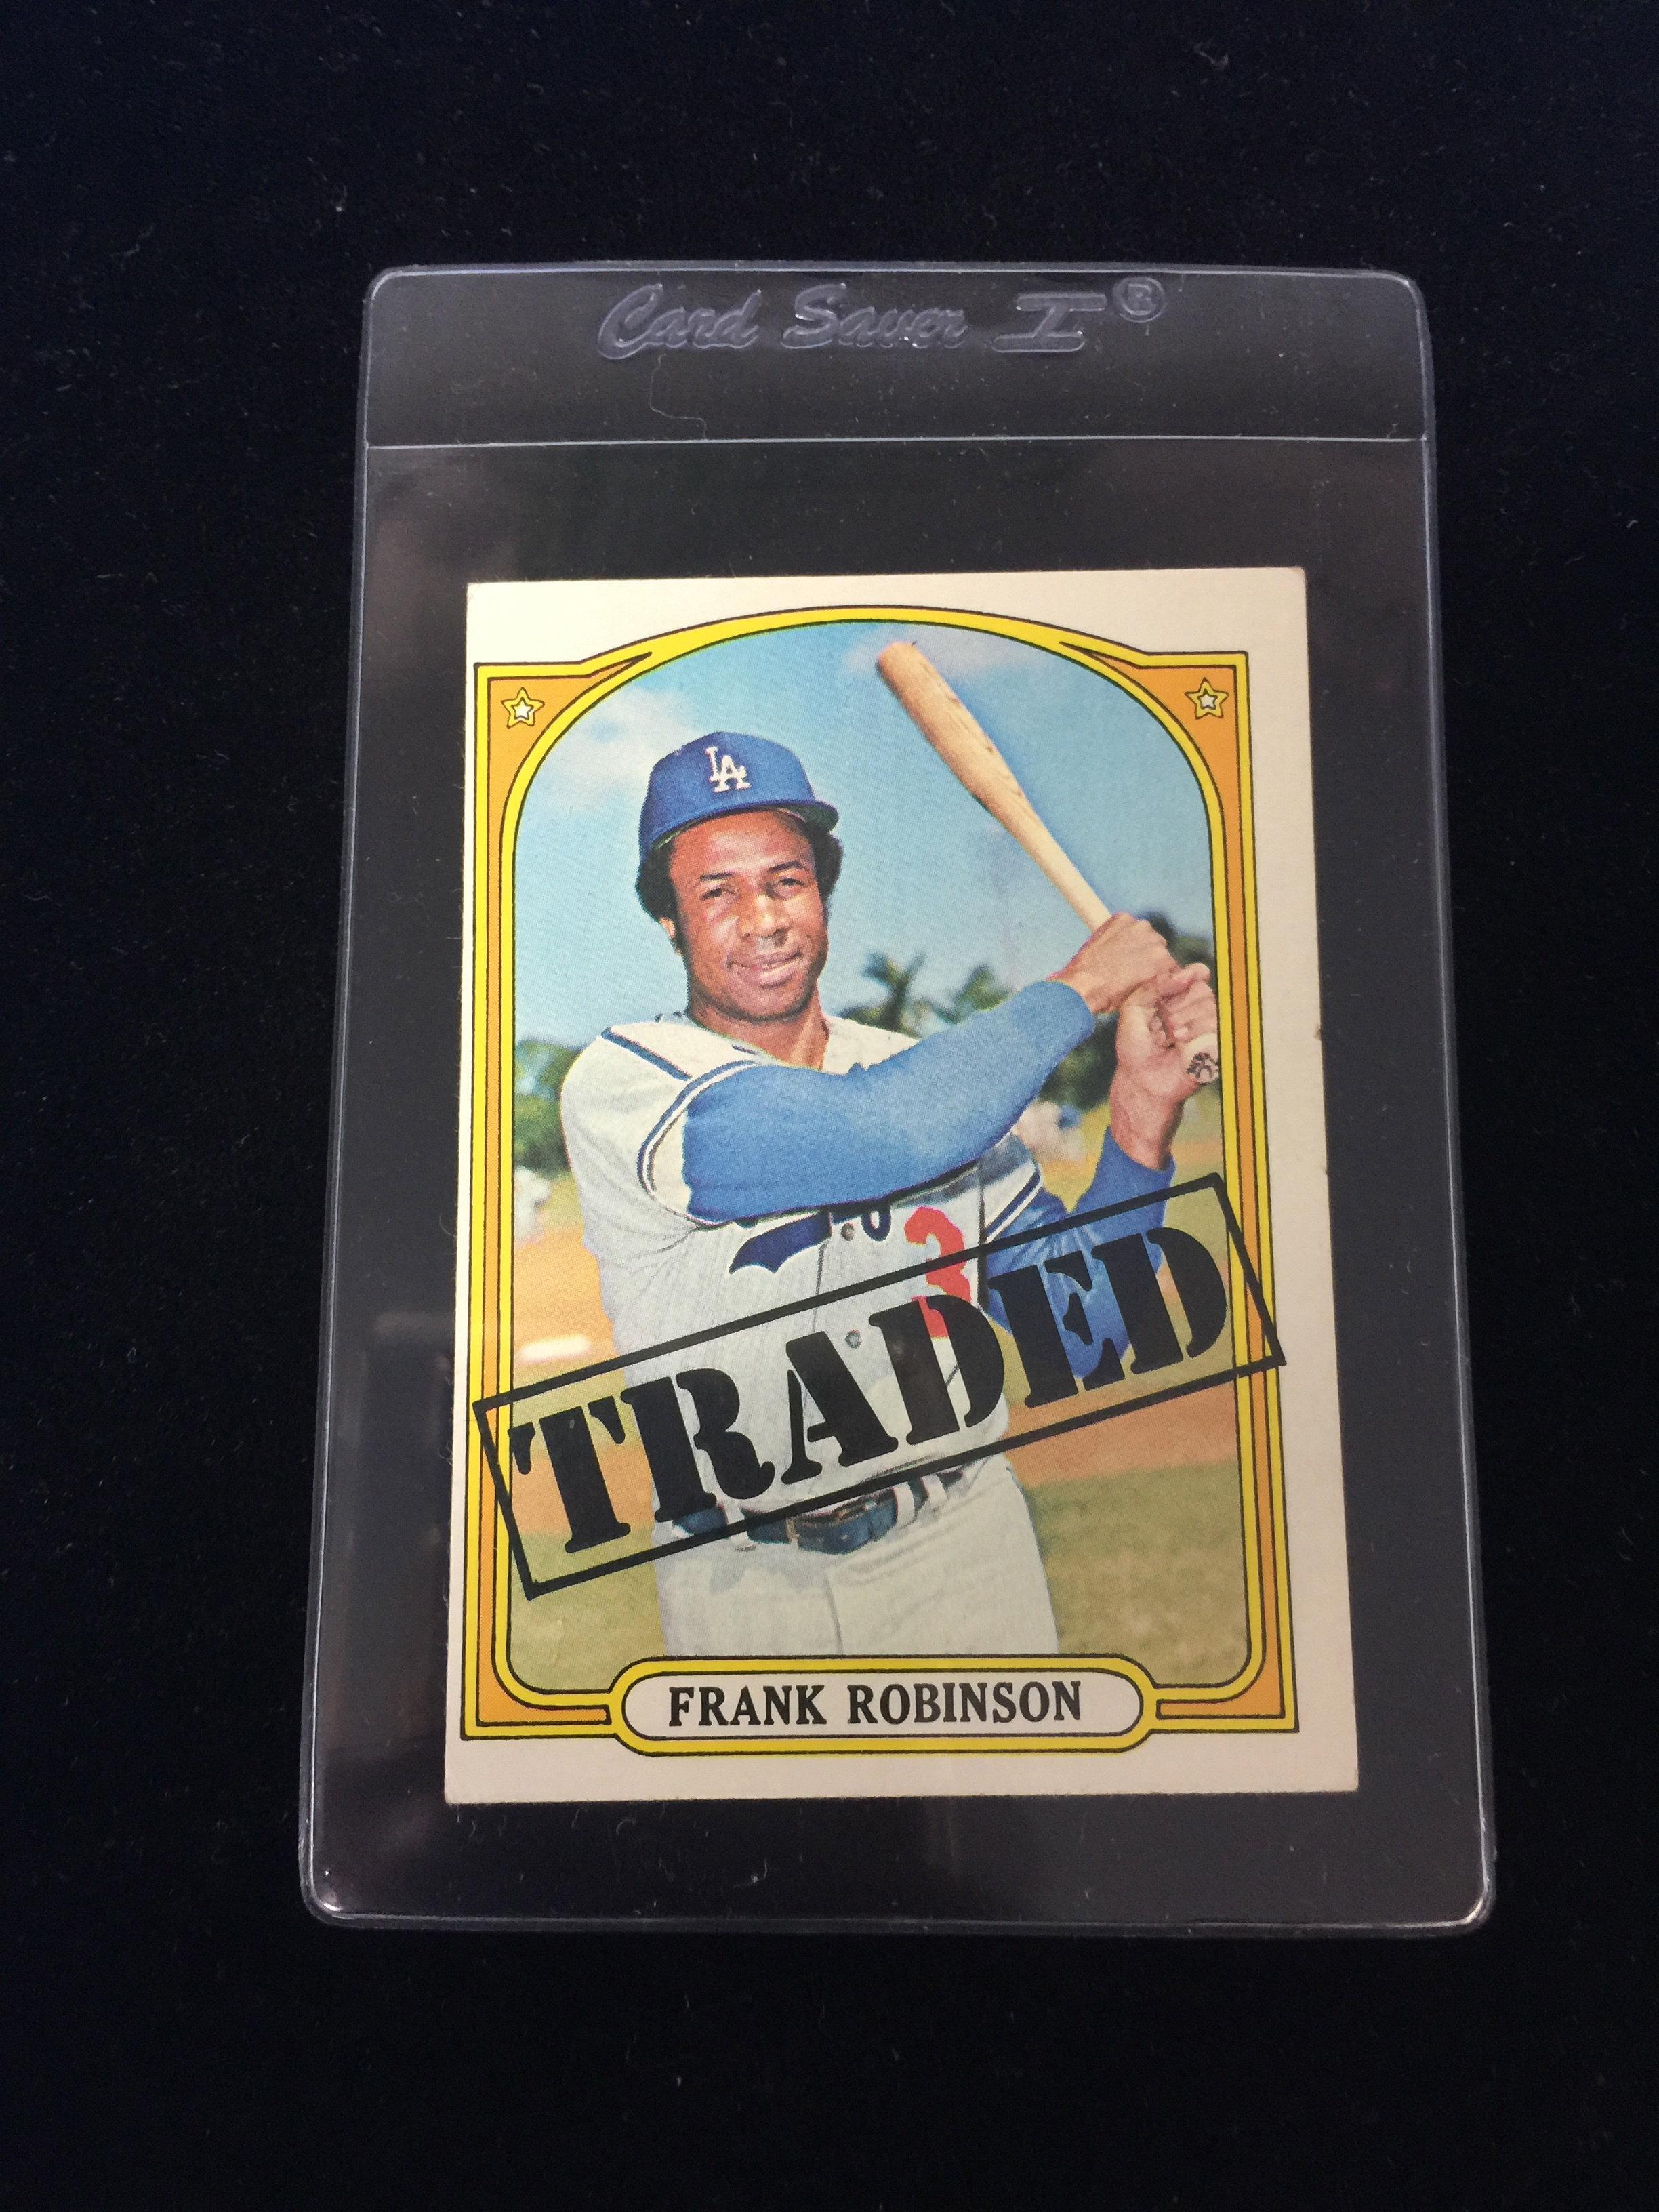 1972 Topps #754 Frank Robinson Dodgers TRADED High Number Baseball Card - RARE